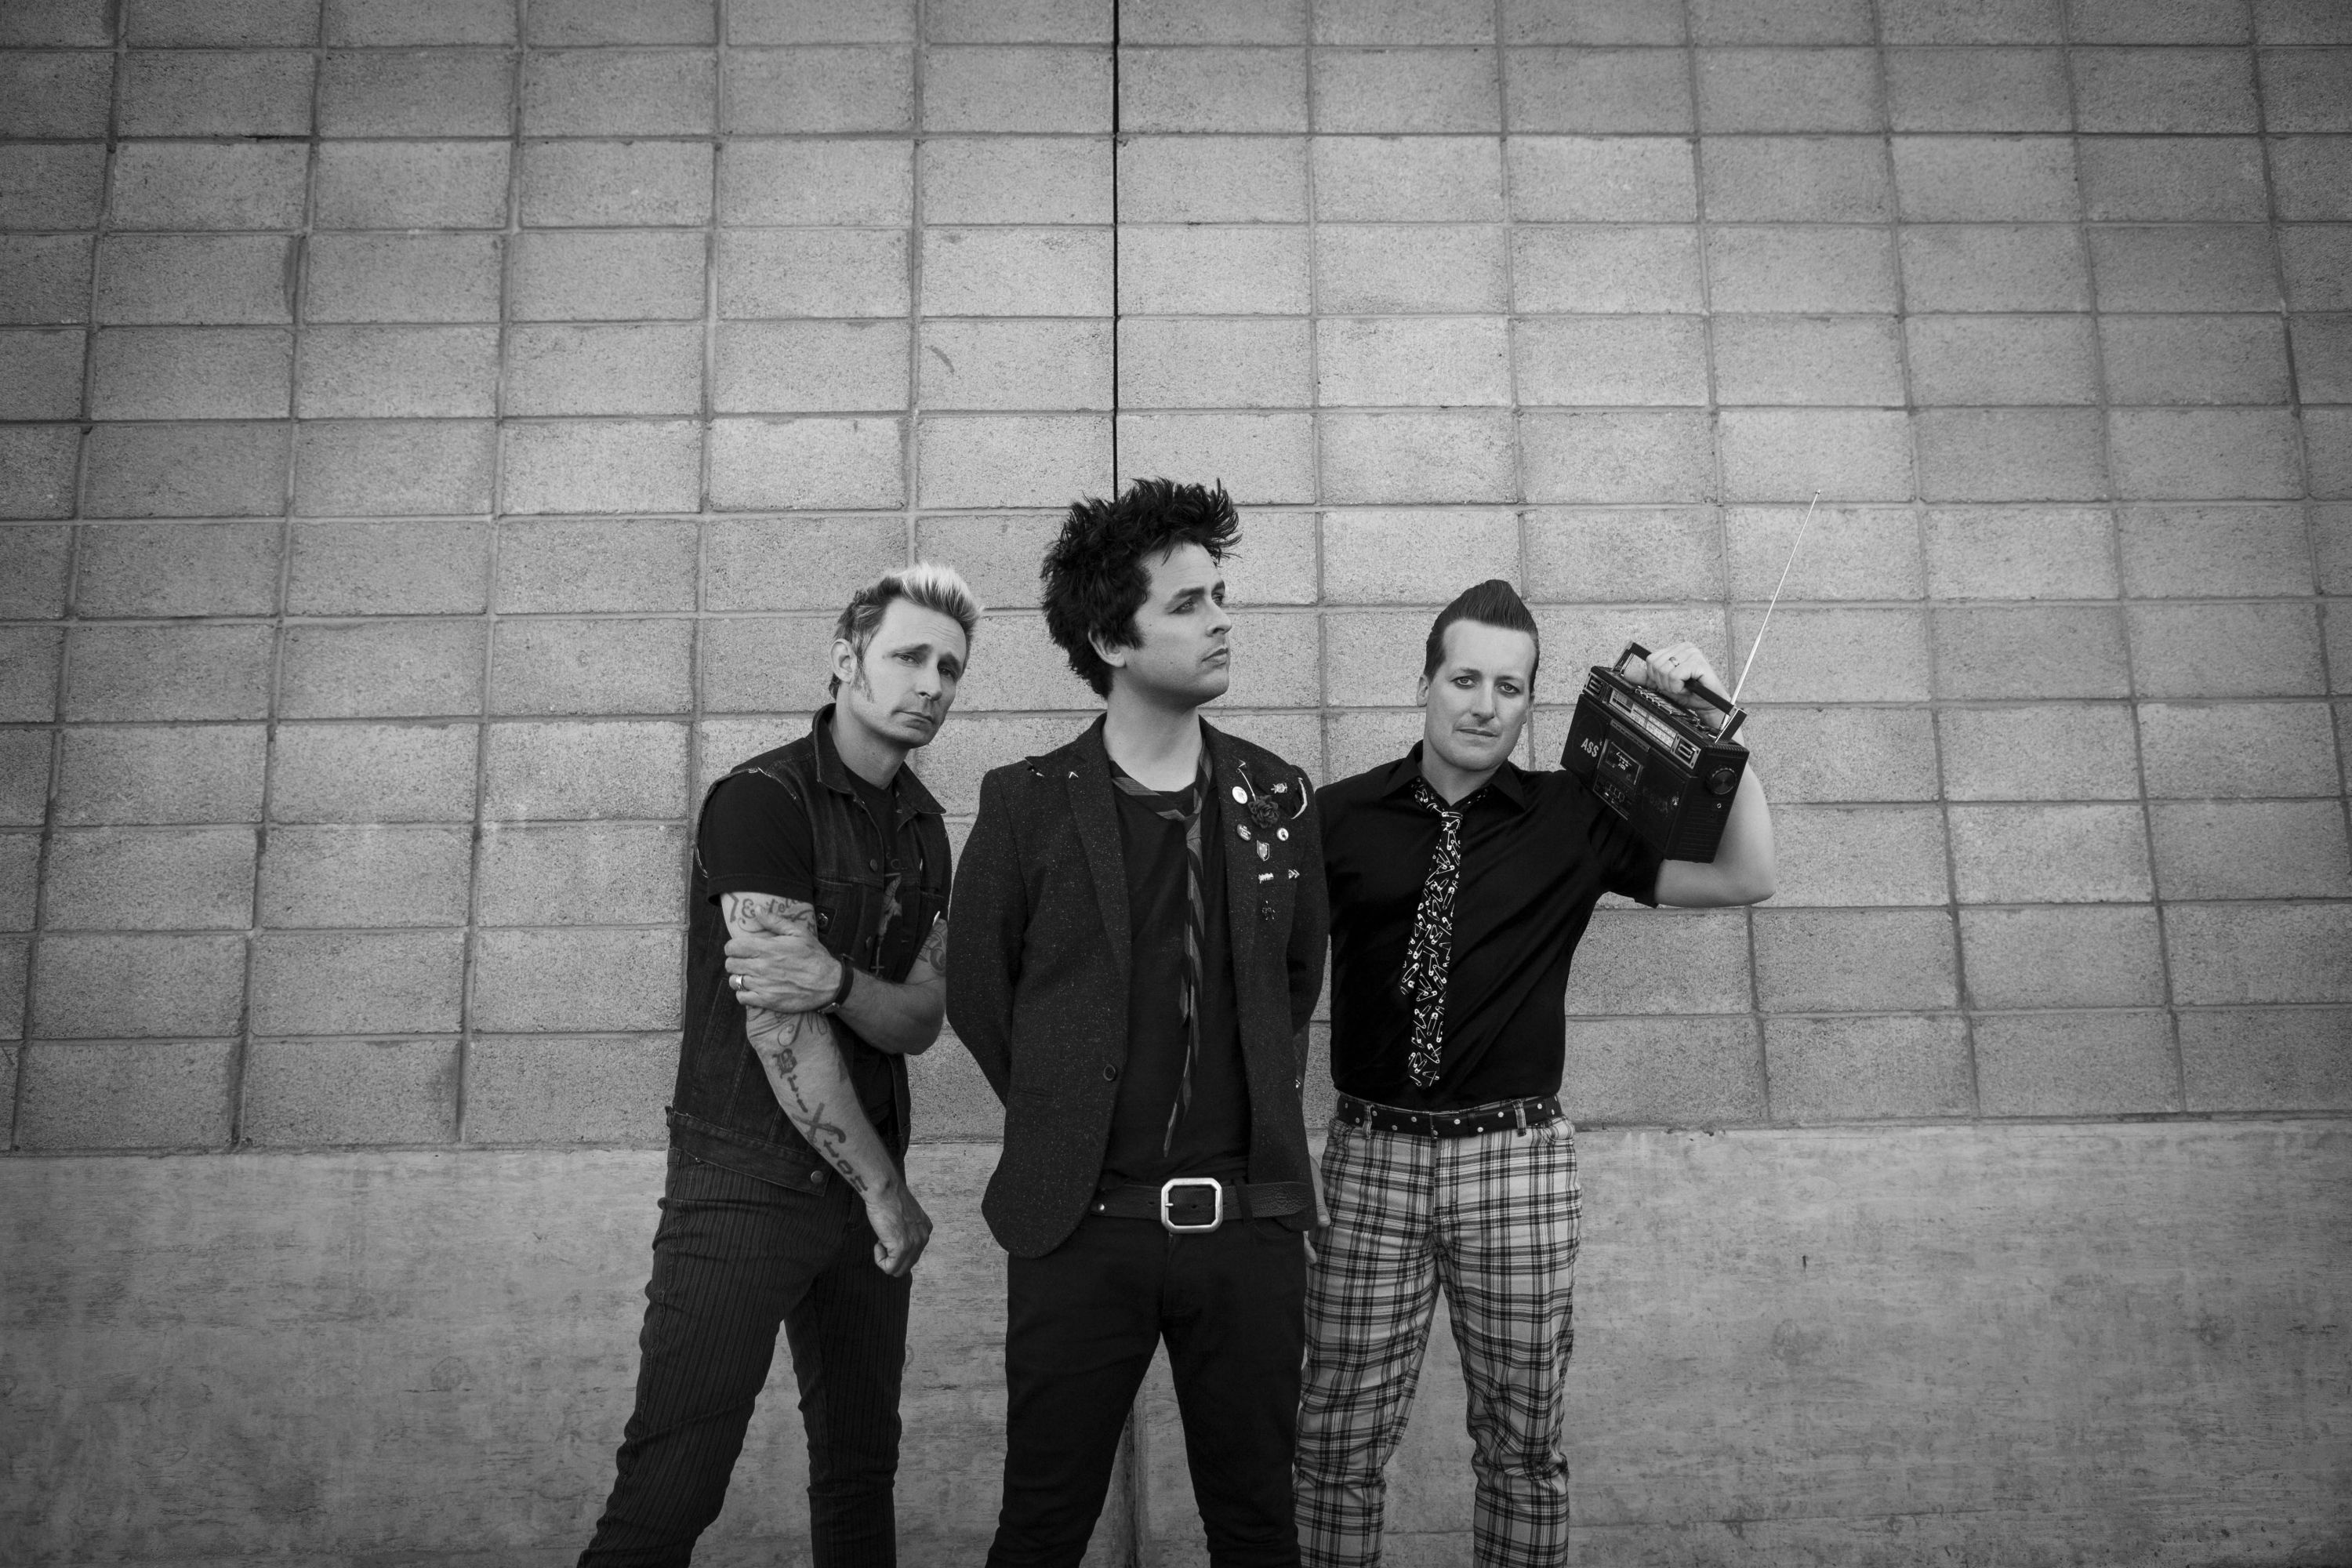 Green Day (Band): An American rock band formed in the East Bay of California in 1987 by lead vocalist and guitarist Billie Joe Armstrong. 3000x2000 HD Background.